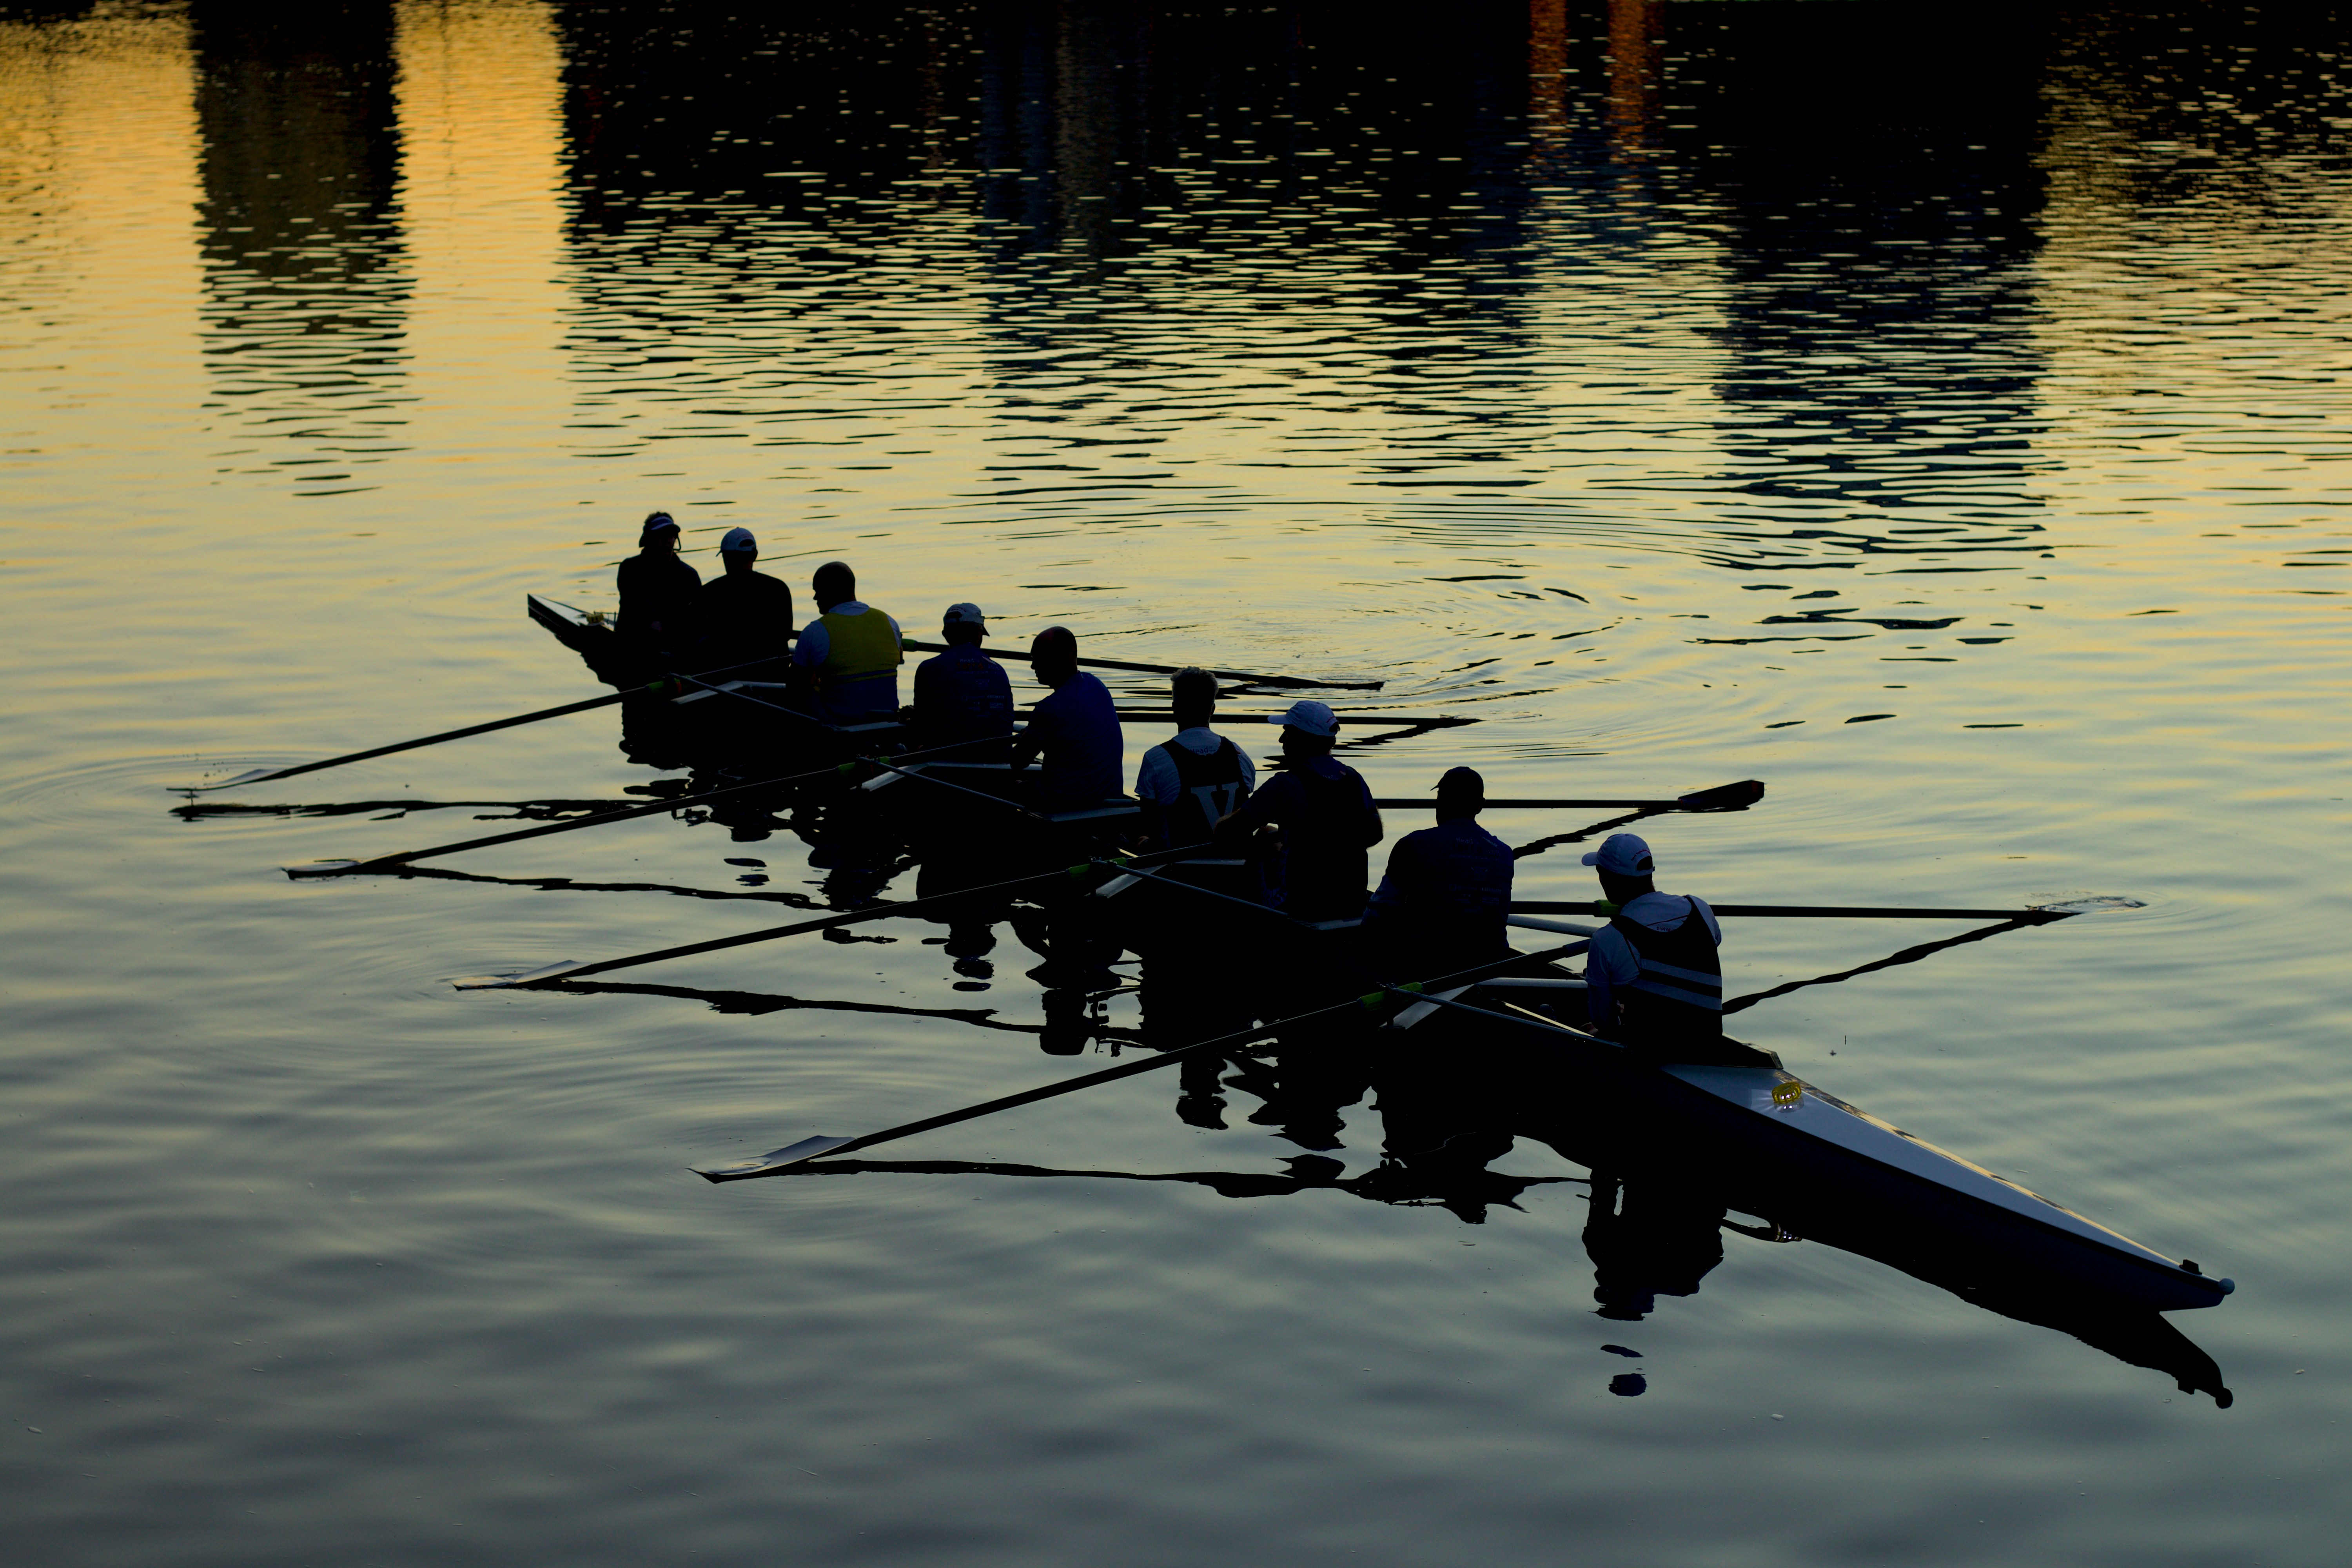 Photo of a crew team rowing their boar, silhouetted against an evening sky that reflects off the water